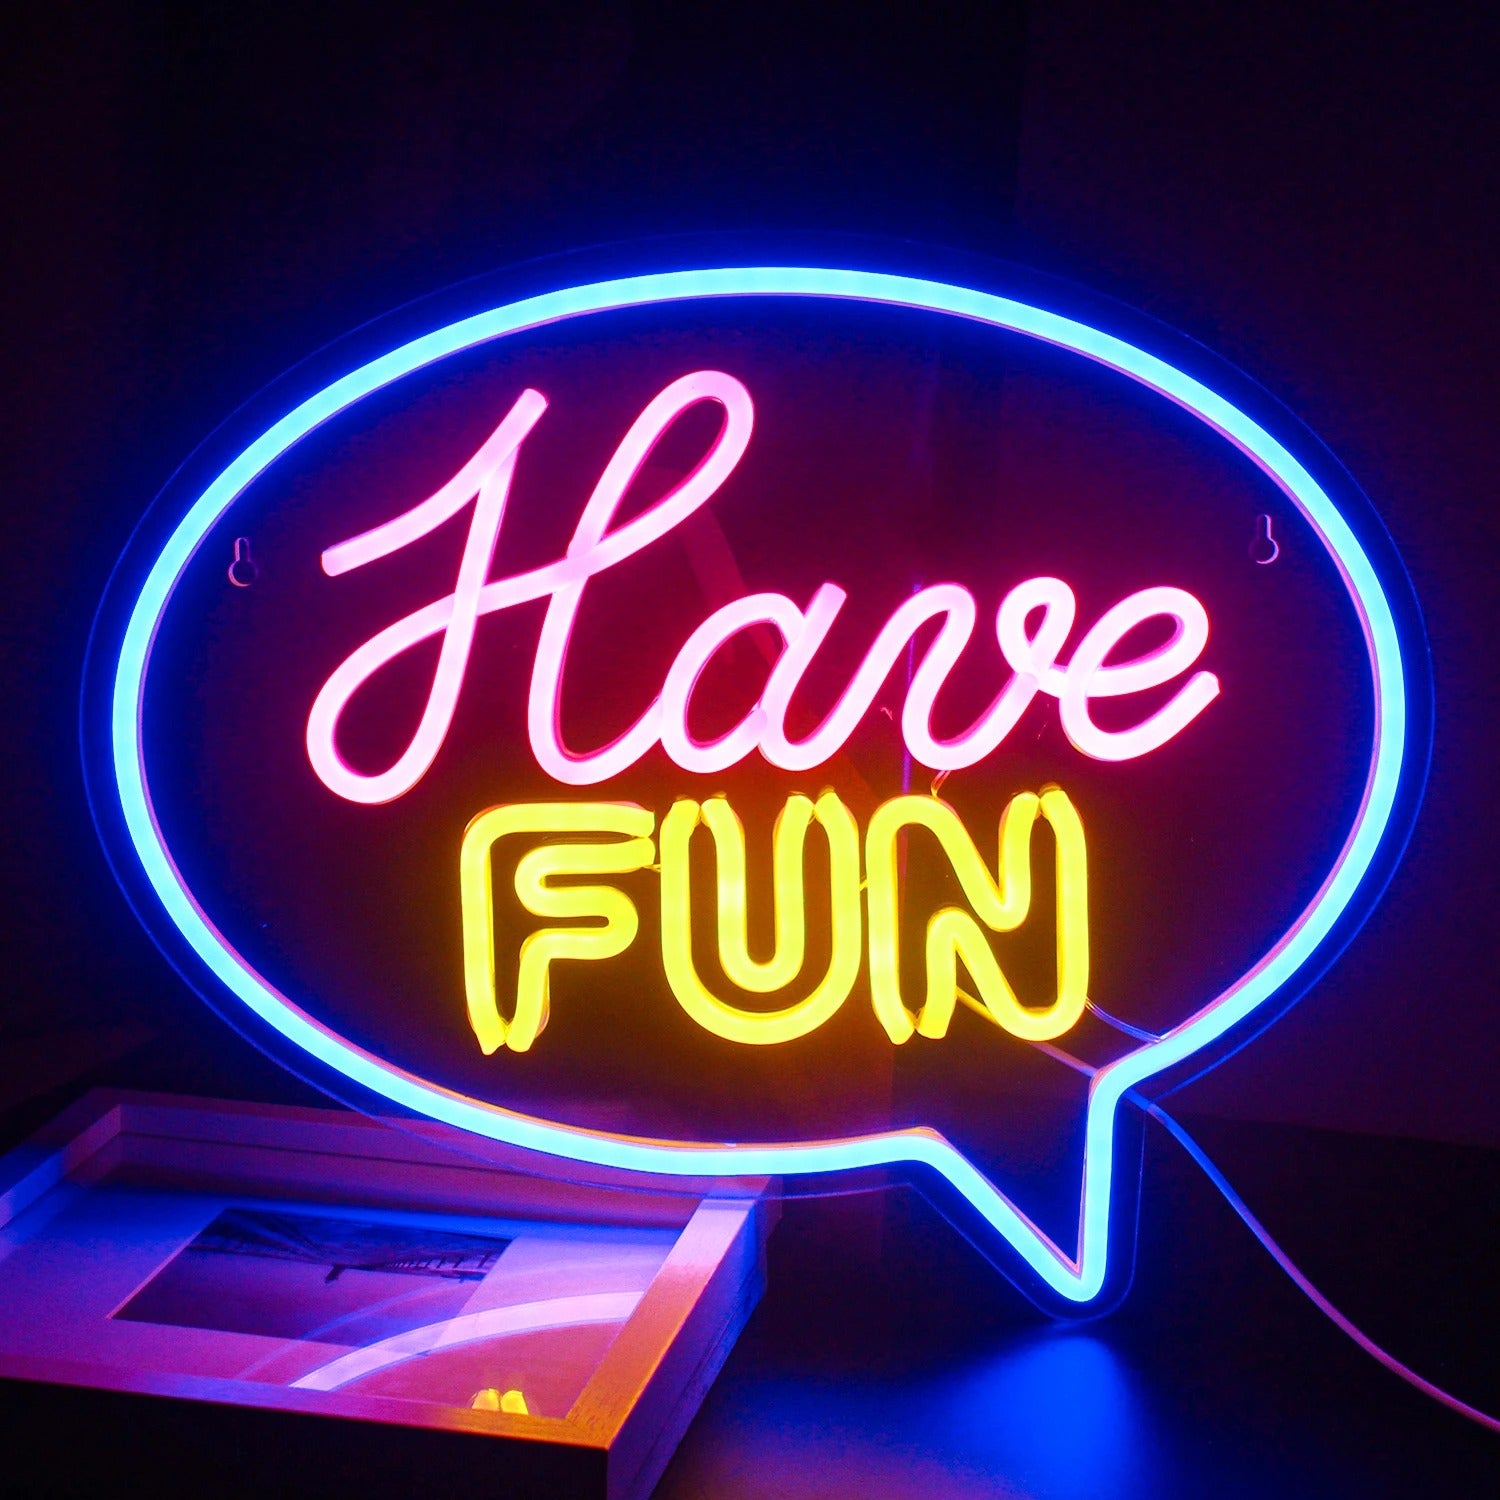 Neon signs for events serve as eye-catching focal points